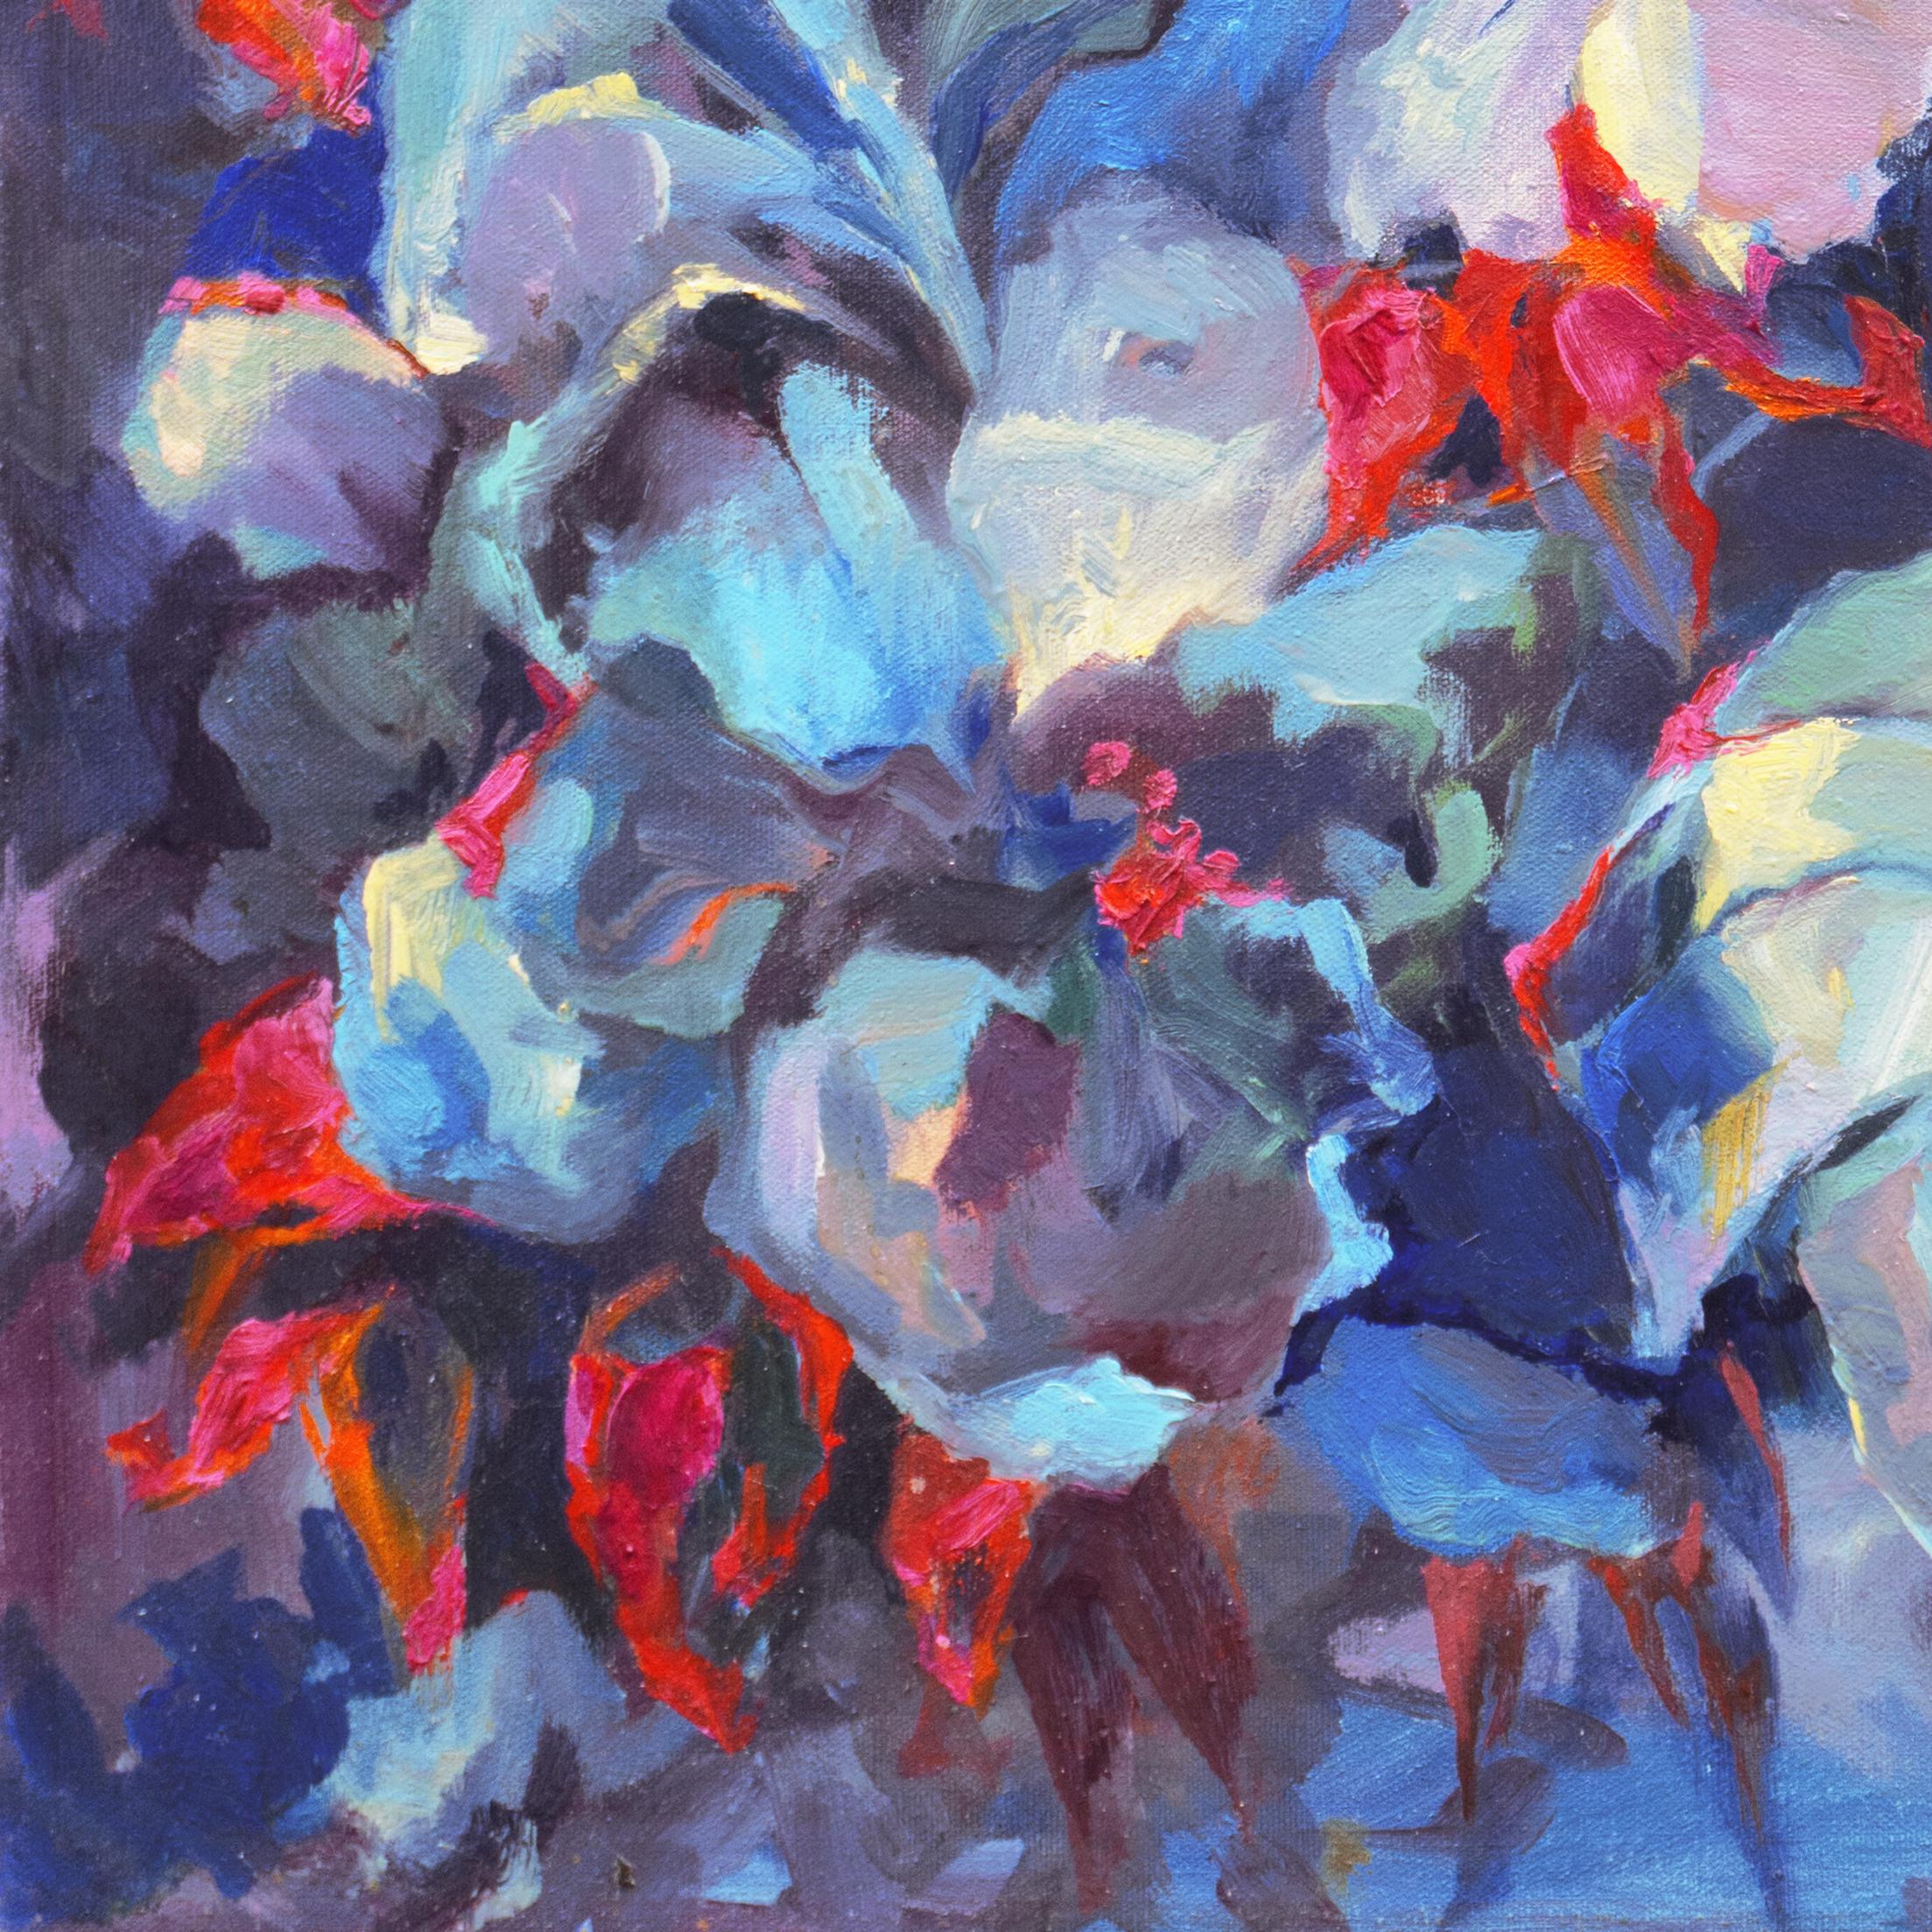 Signed lower right, 'Nira Moblad' ( American, 1920-1993) and dated 1964; additionally signed verso.

A substantial and dynamic, semi-abstracted oil still-life of Lilies and Honeysuckle by this Pasadena born artist who subsequently lived and painted